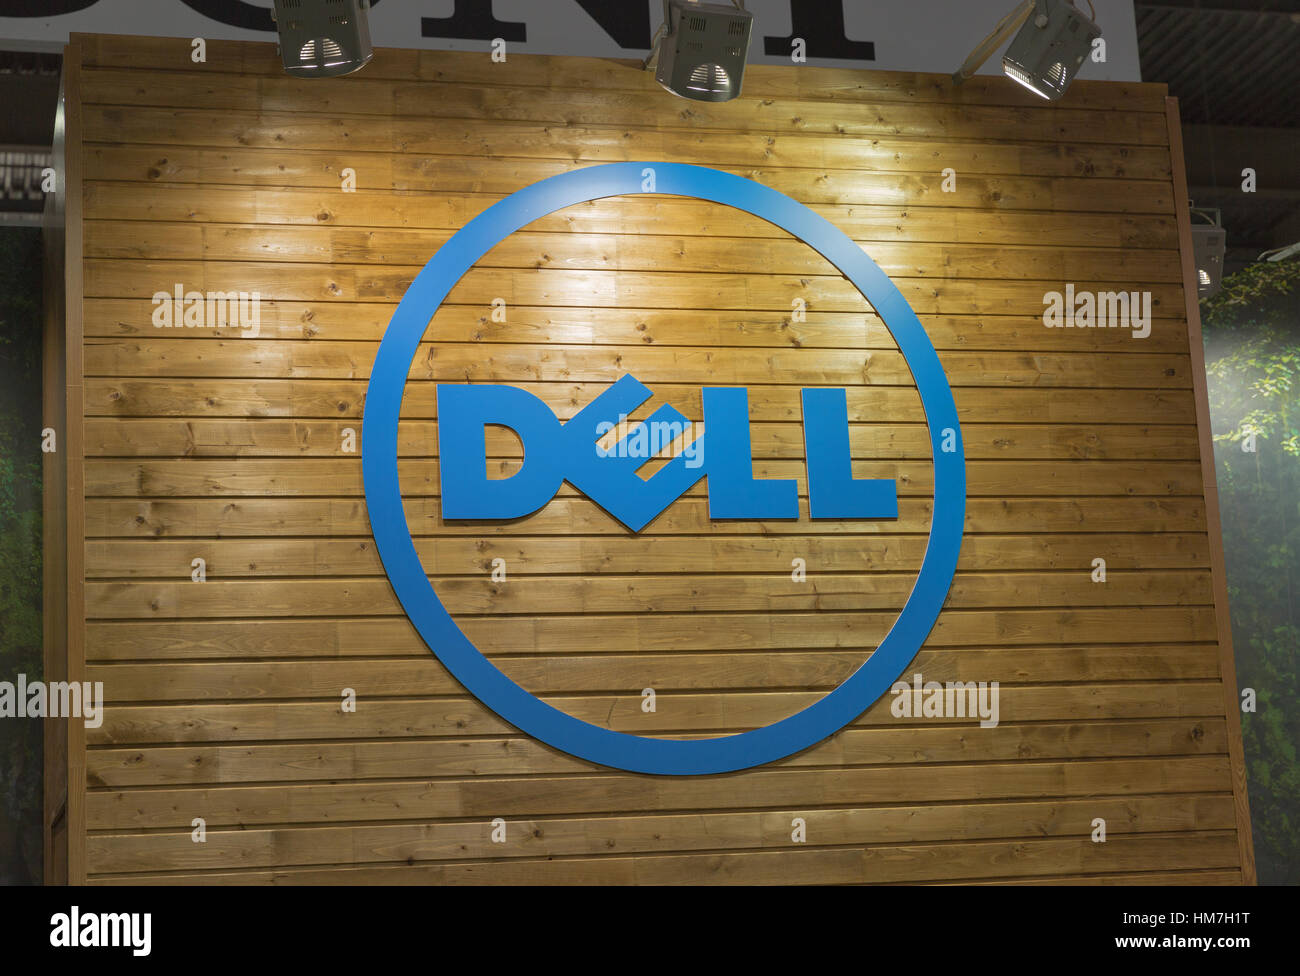 KIEV, UKRAINE - OCTOBER 11, 2015:  Dell logo on a wooden base illuminated by searchlights on company booth during CEE 2015, largest electronics trade  Stock Photo